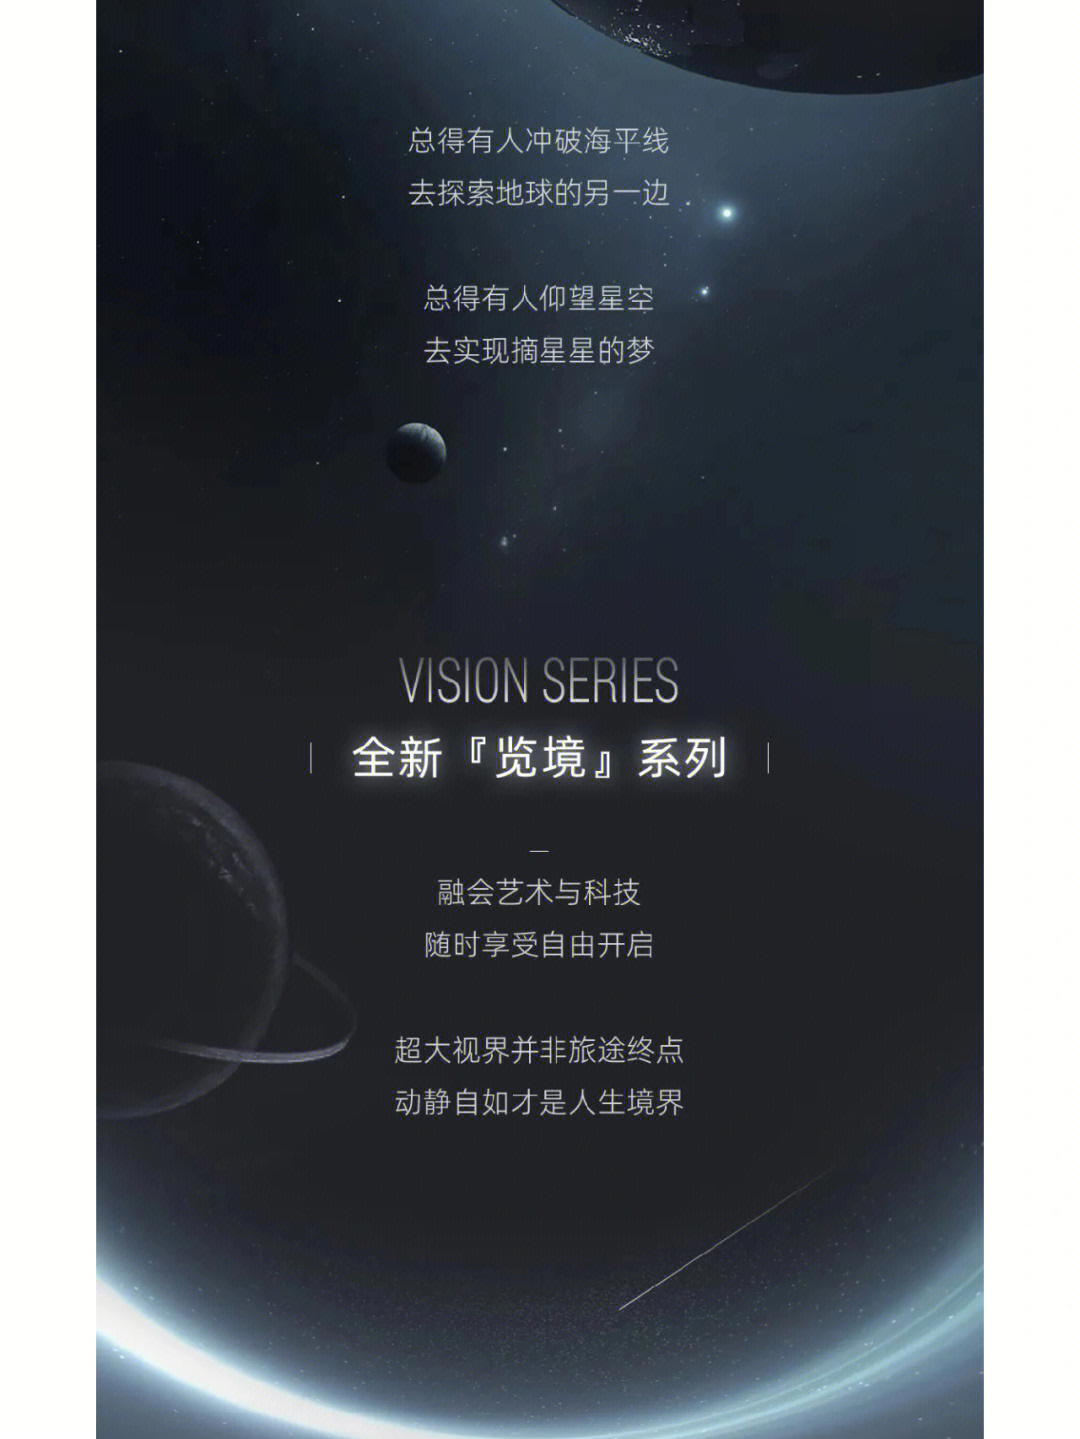 jqvision visionseries图片